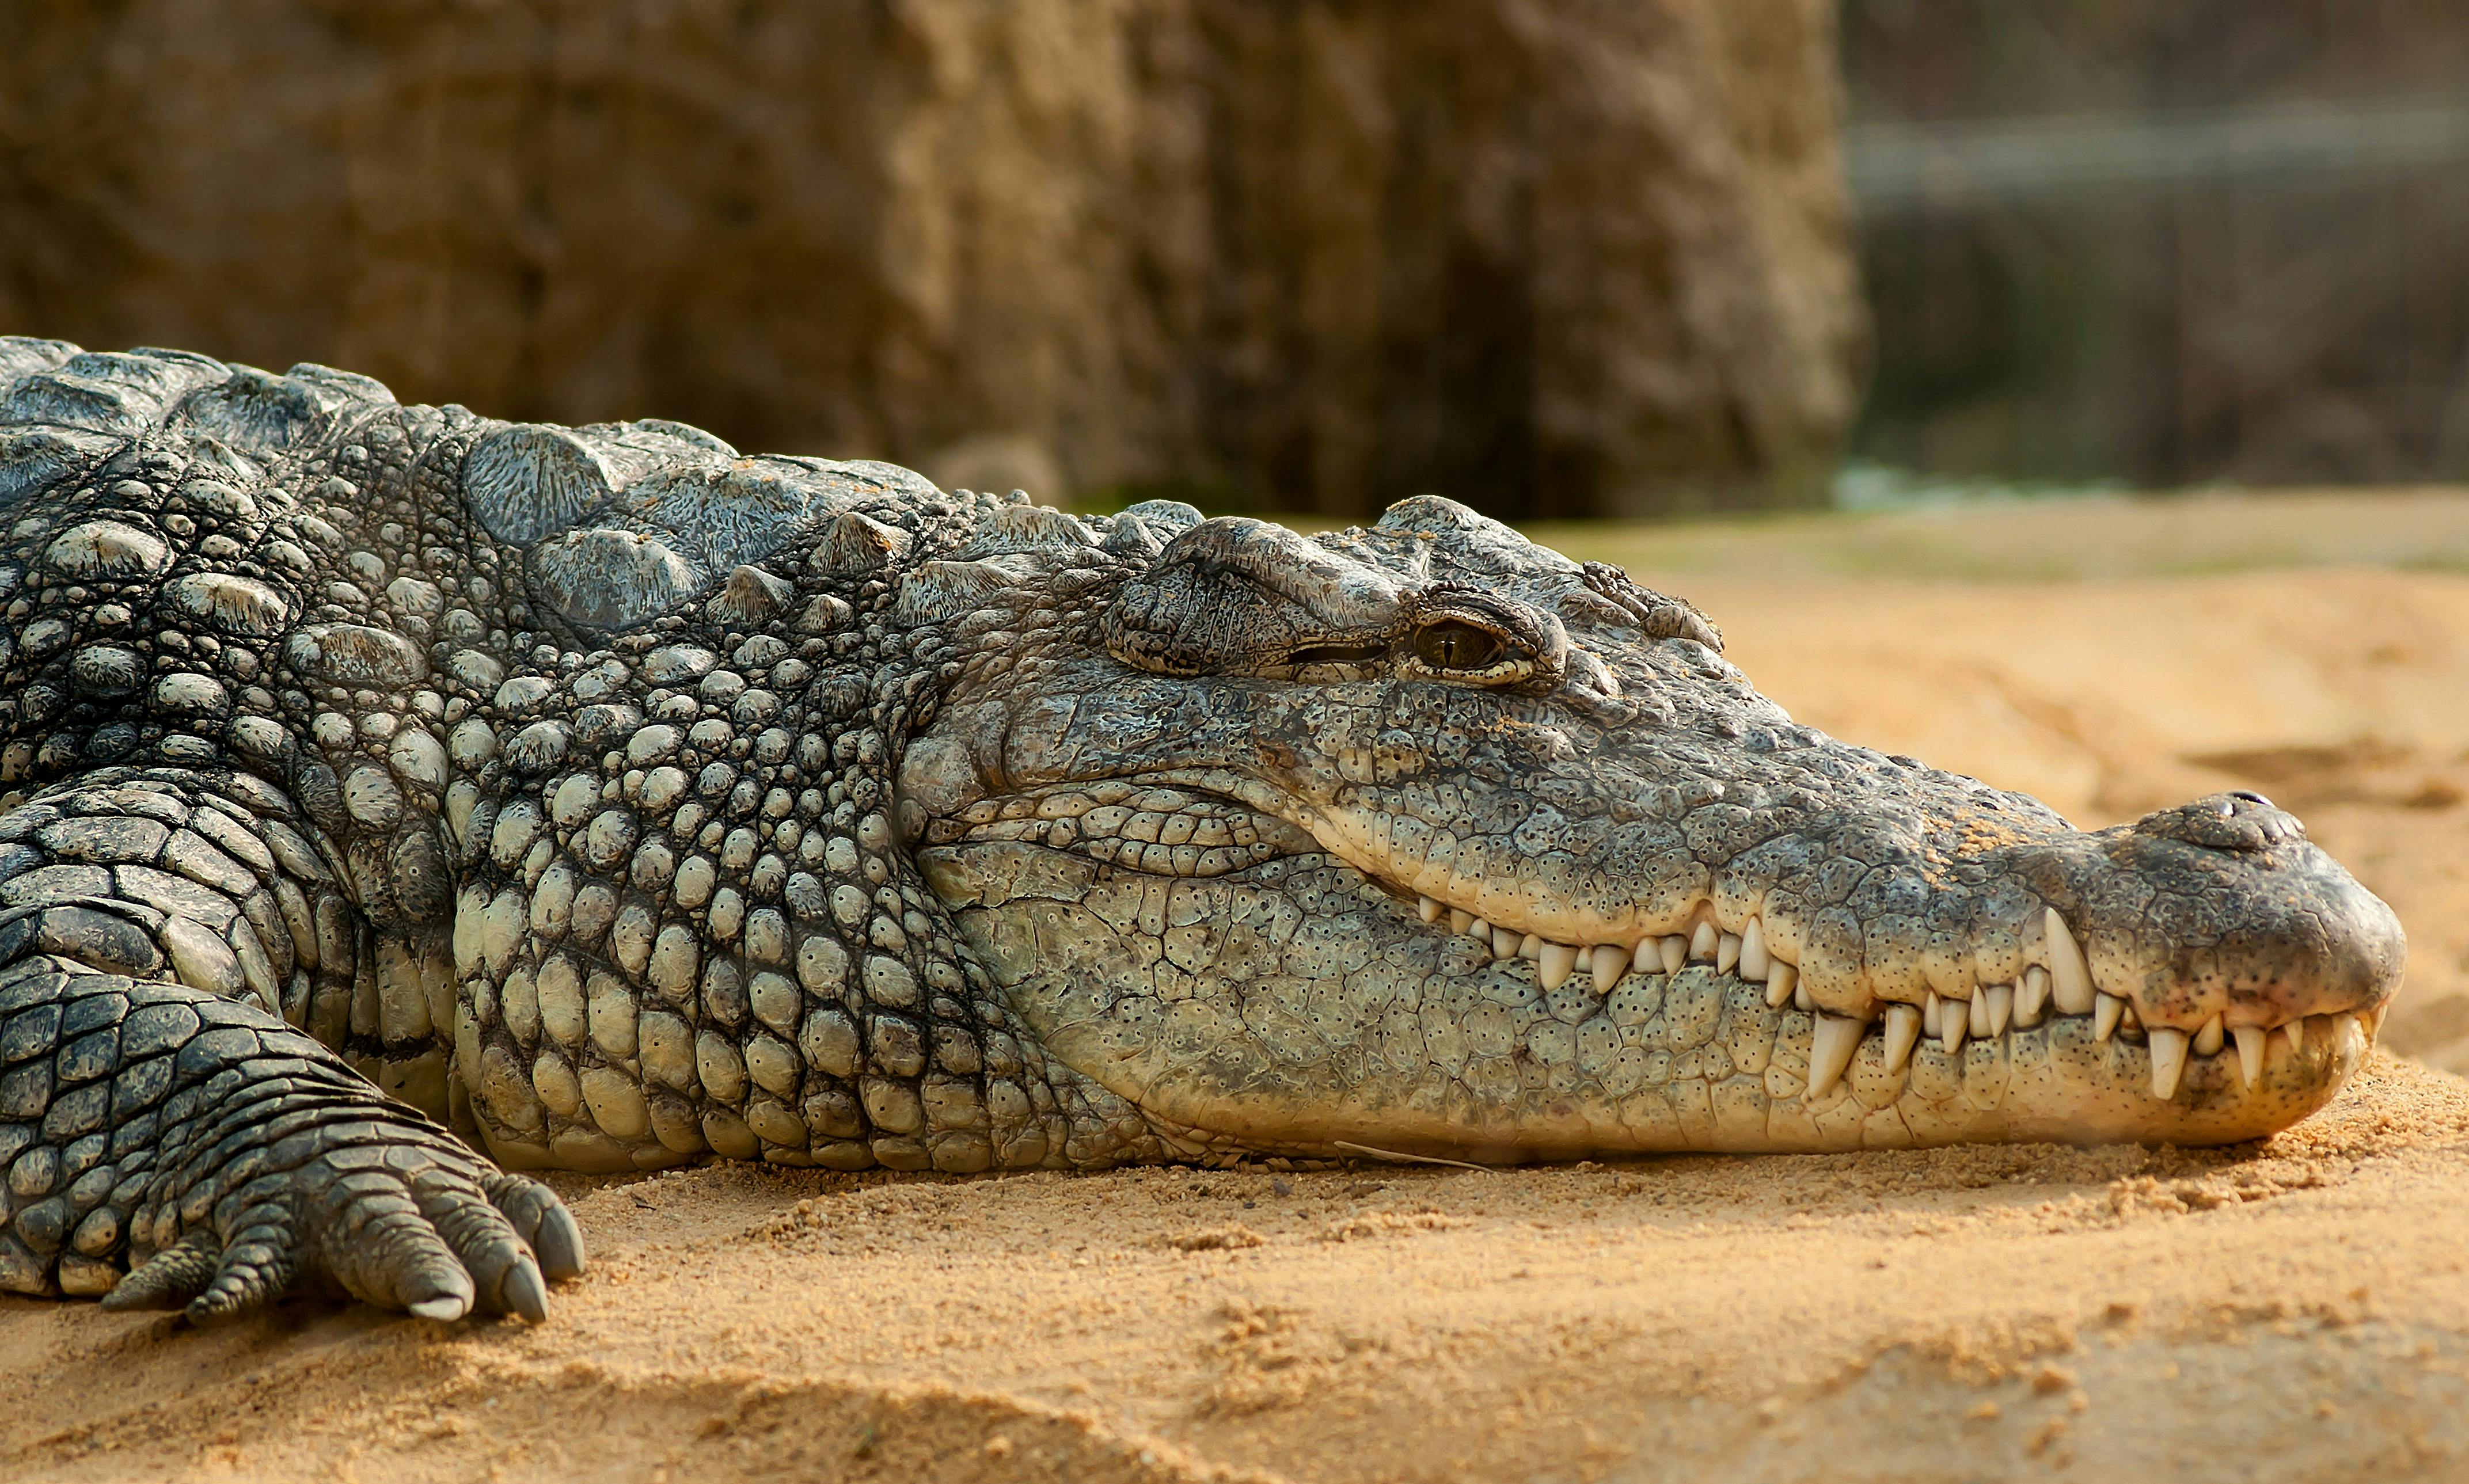 Man sleeps without knowing a crocodile is resting under his bed